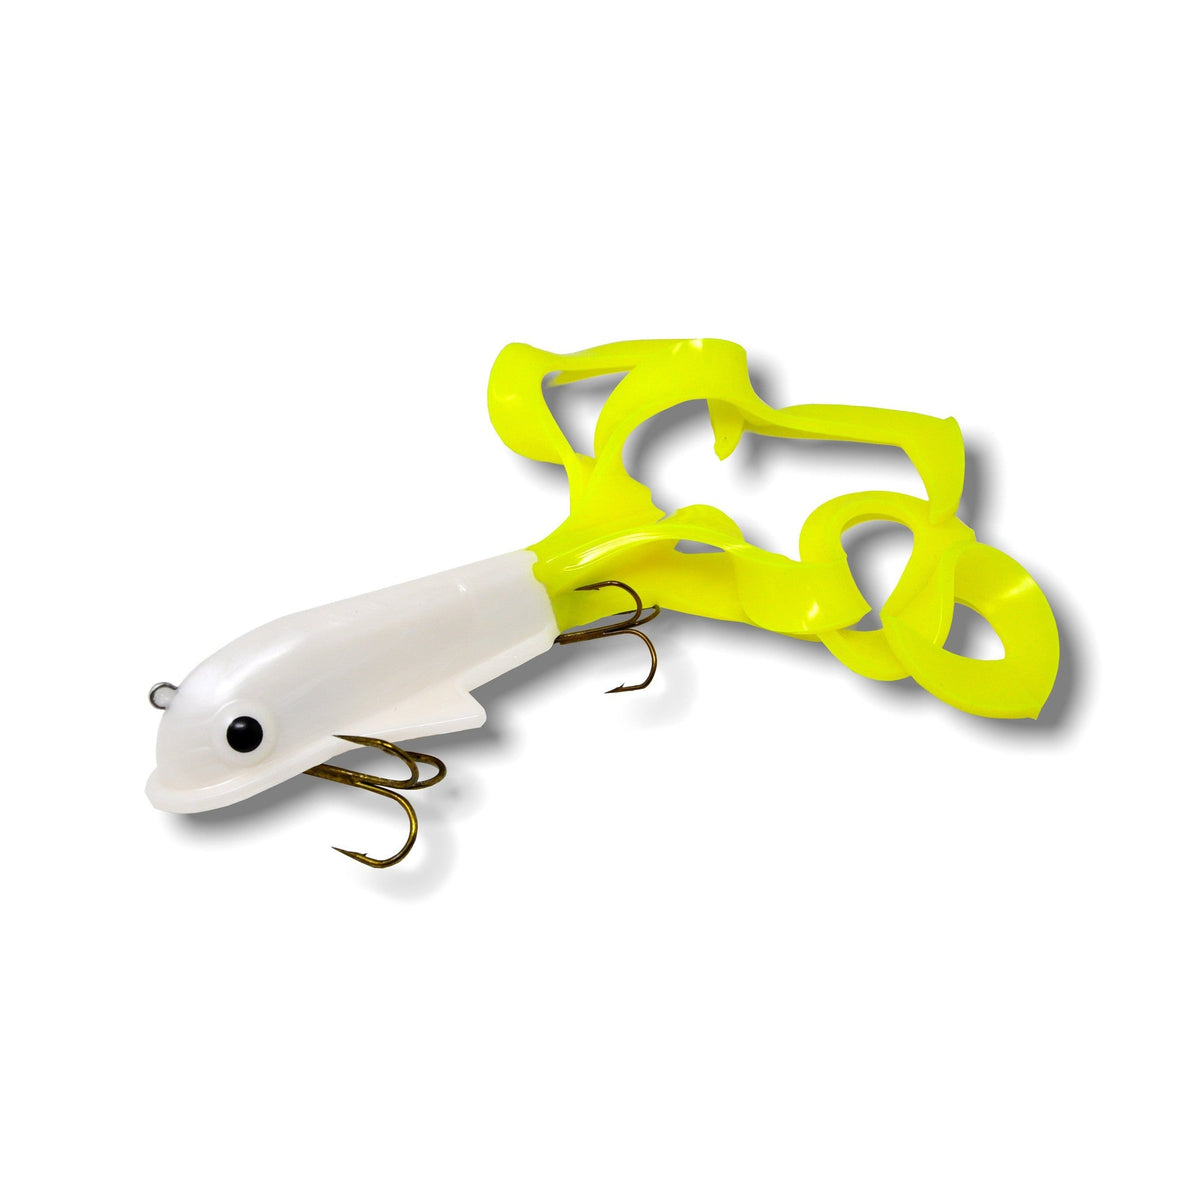 View of Rubber Musky innovation Quad Dawg Lemon Tail available at EZOKO Pike and Musky Shop